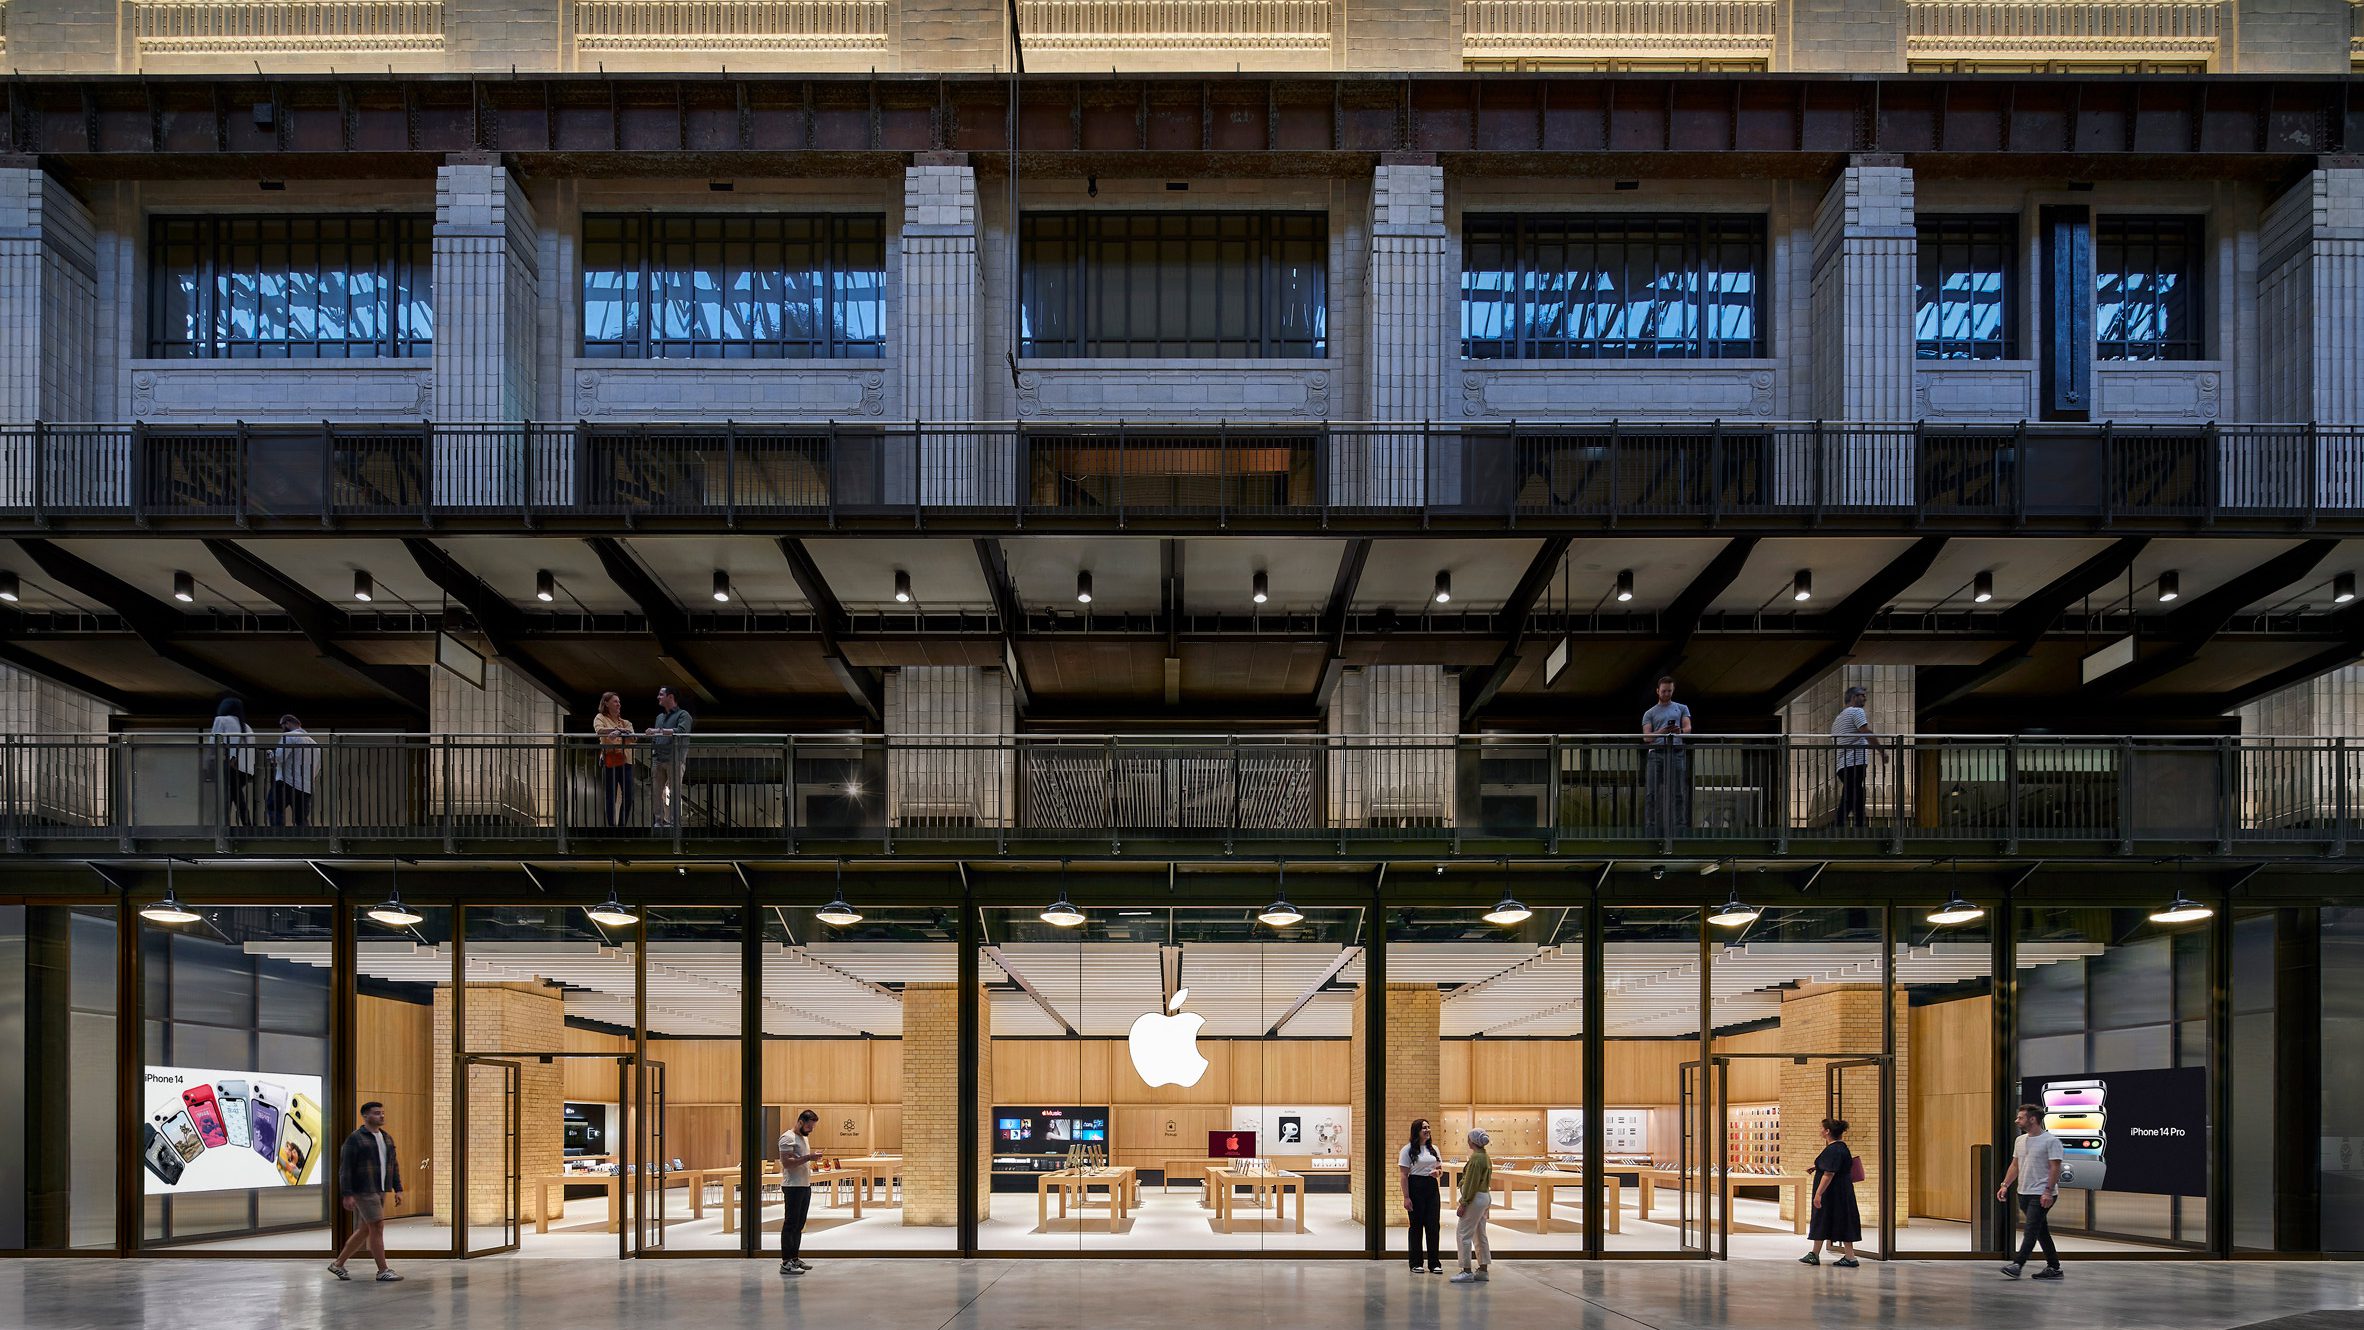 Inside Apple Grand Central retail: The Apple Store on a balcony